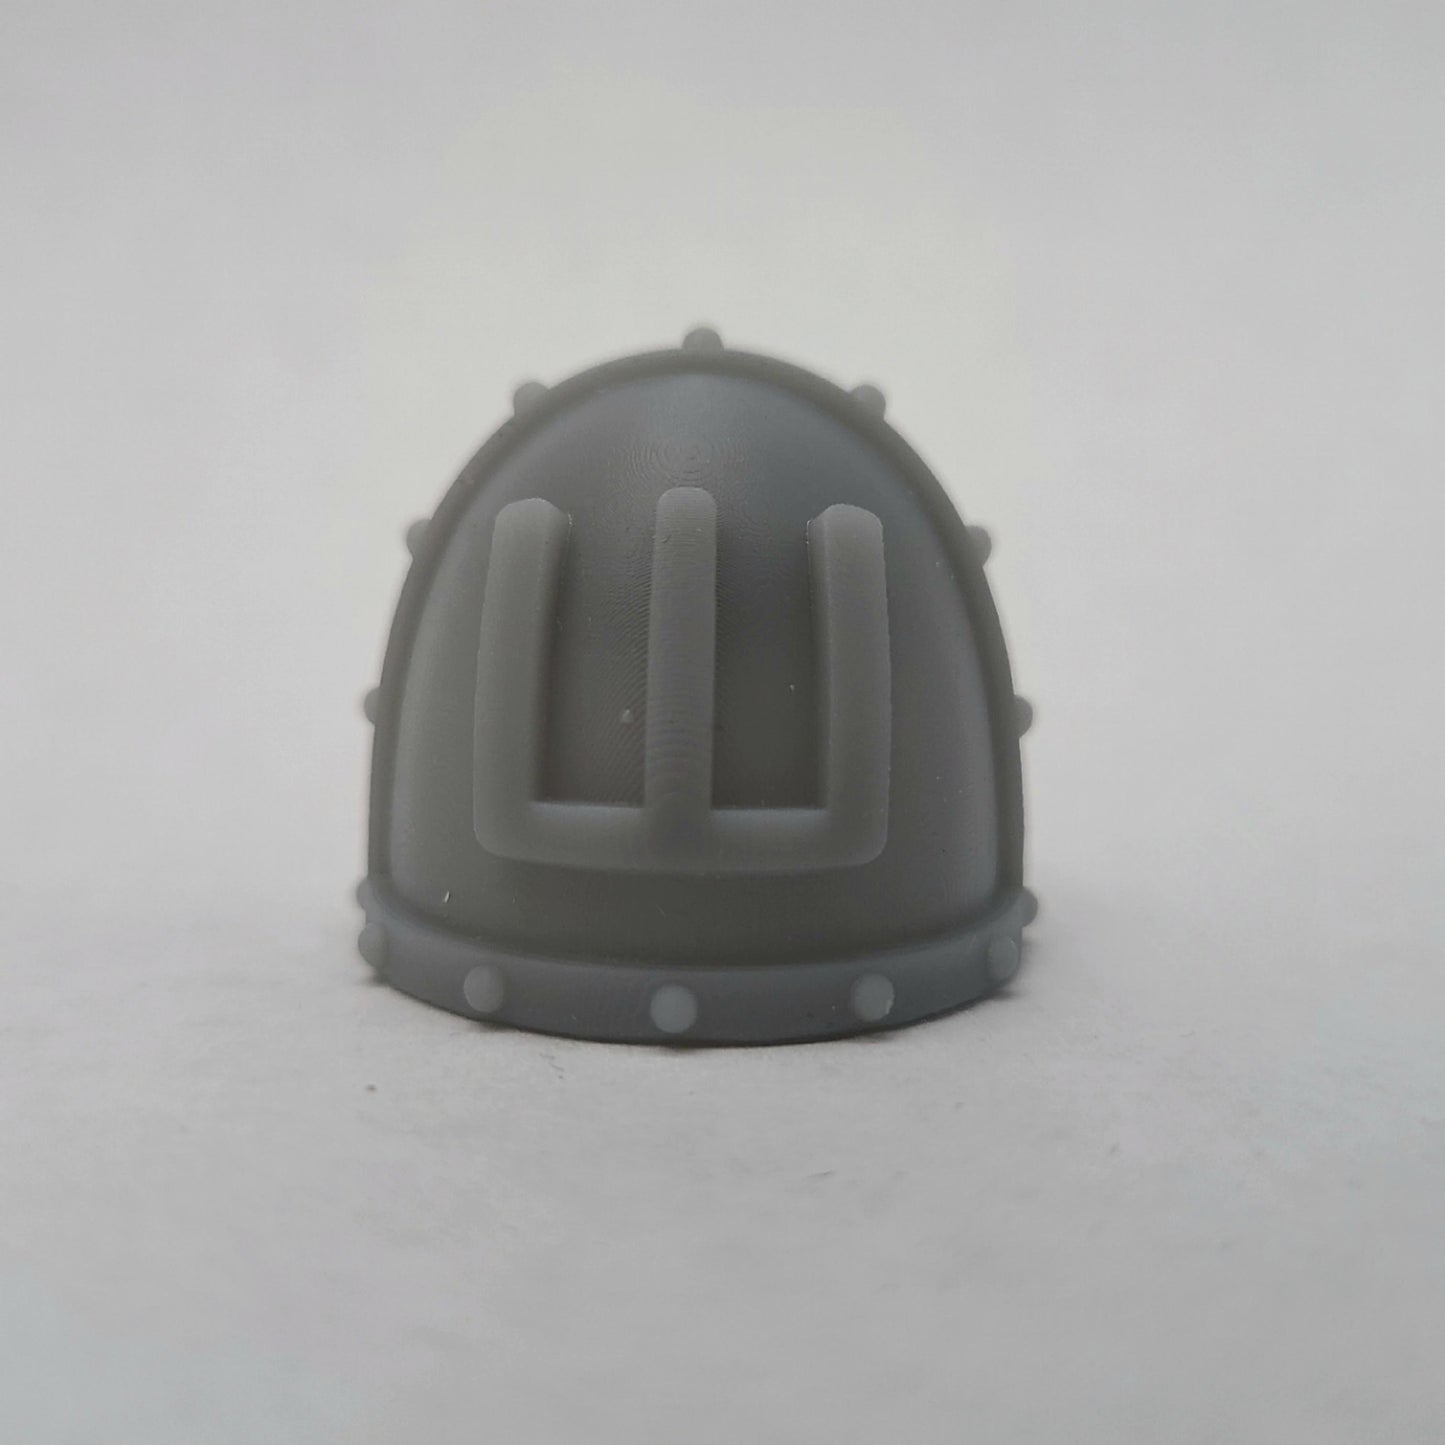 Fell Blooded Veteran MKVII Shoulder Pad Studded compatible with JoyToy Space Marine Action Figures by 18th Scale Armory